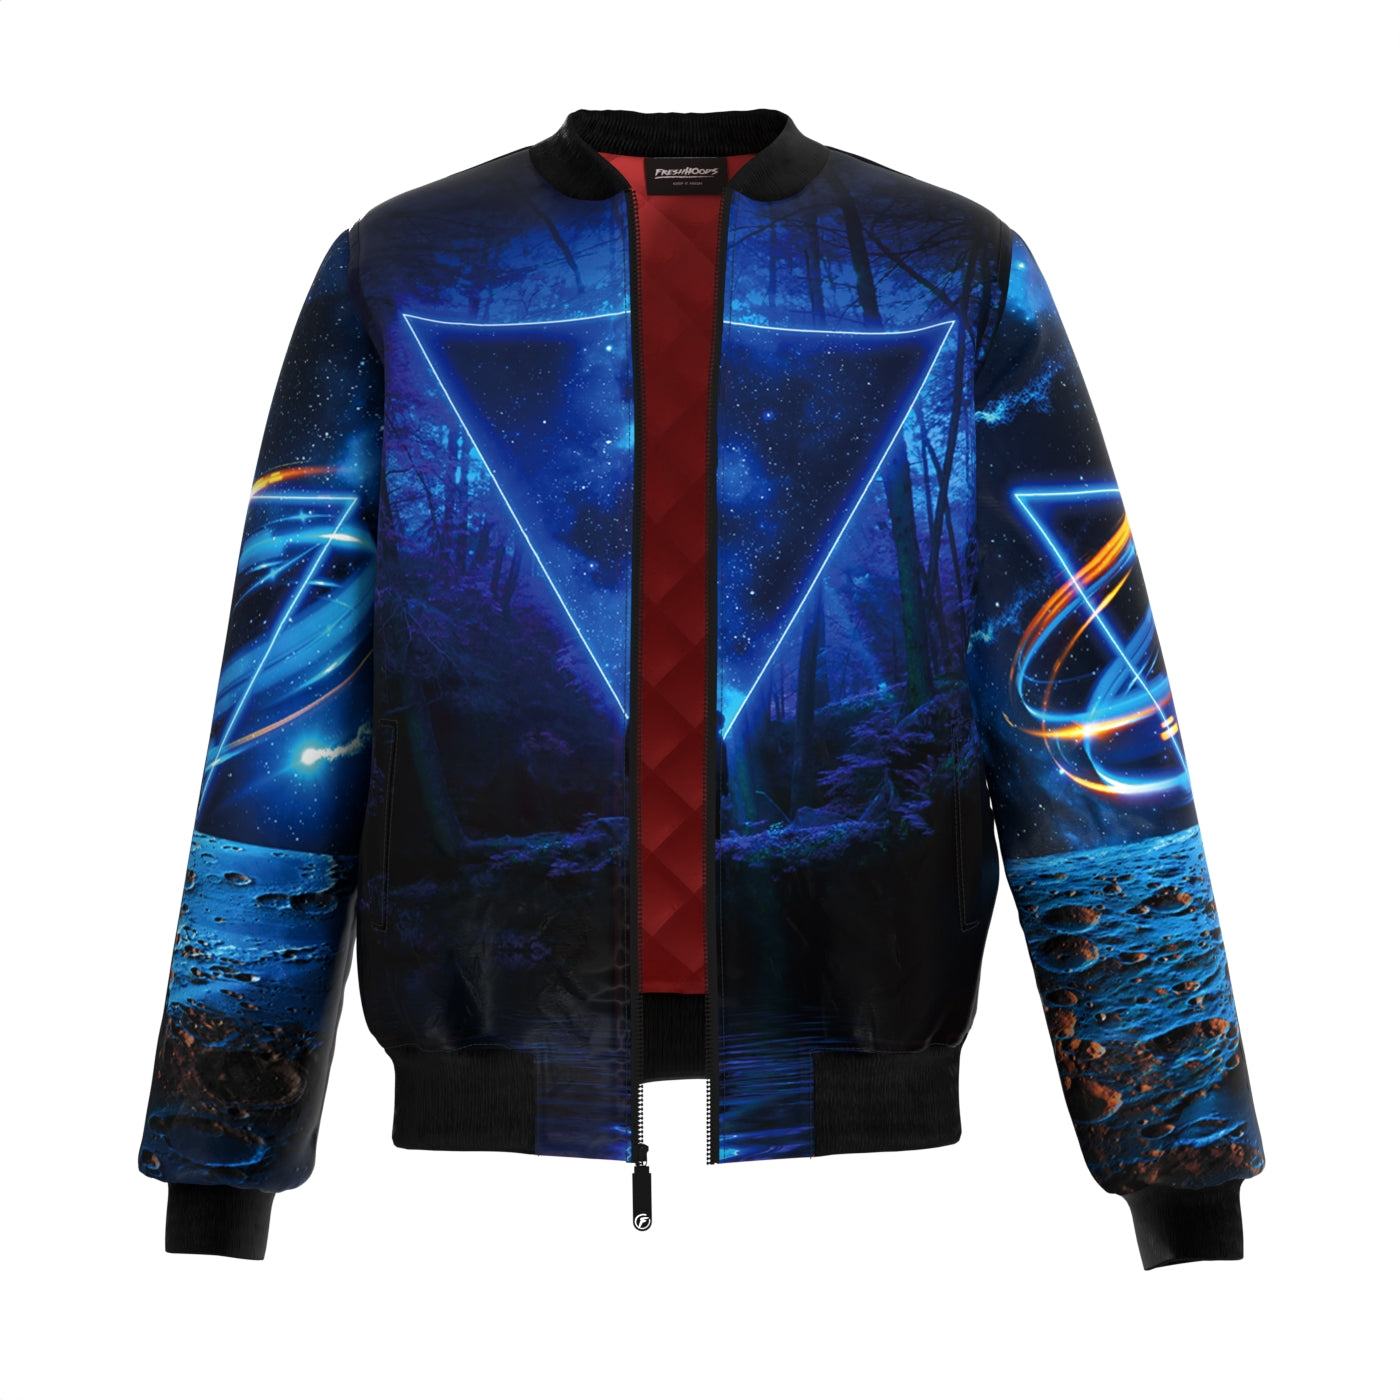 Craters Bomber Jacket